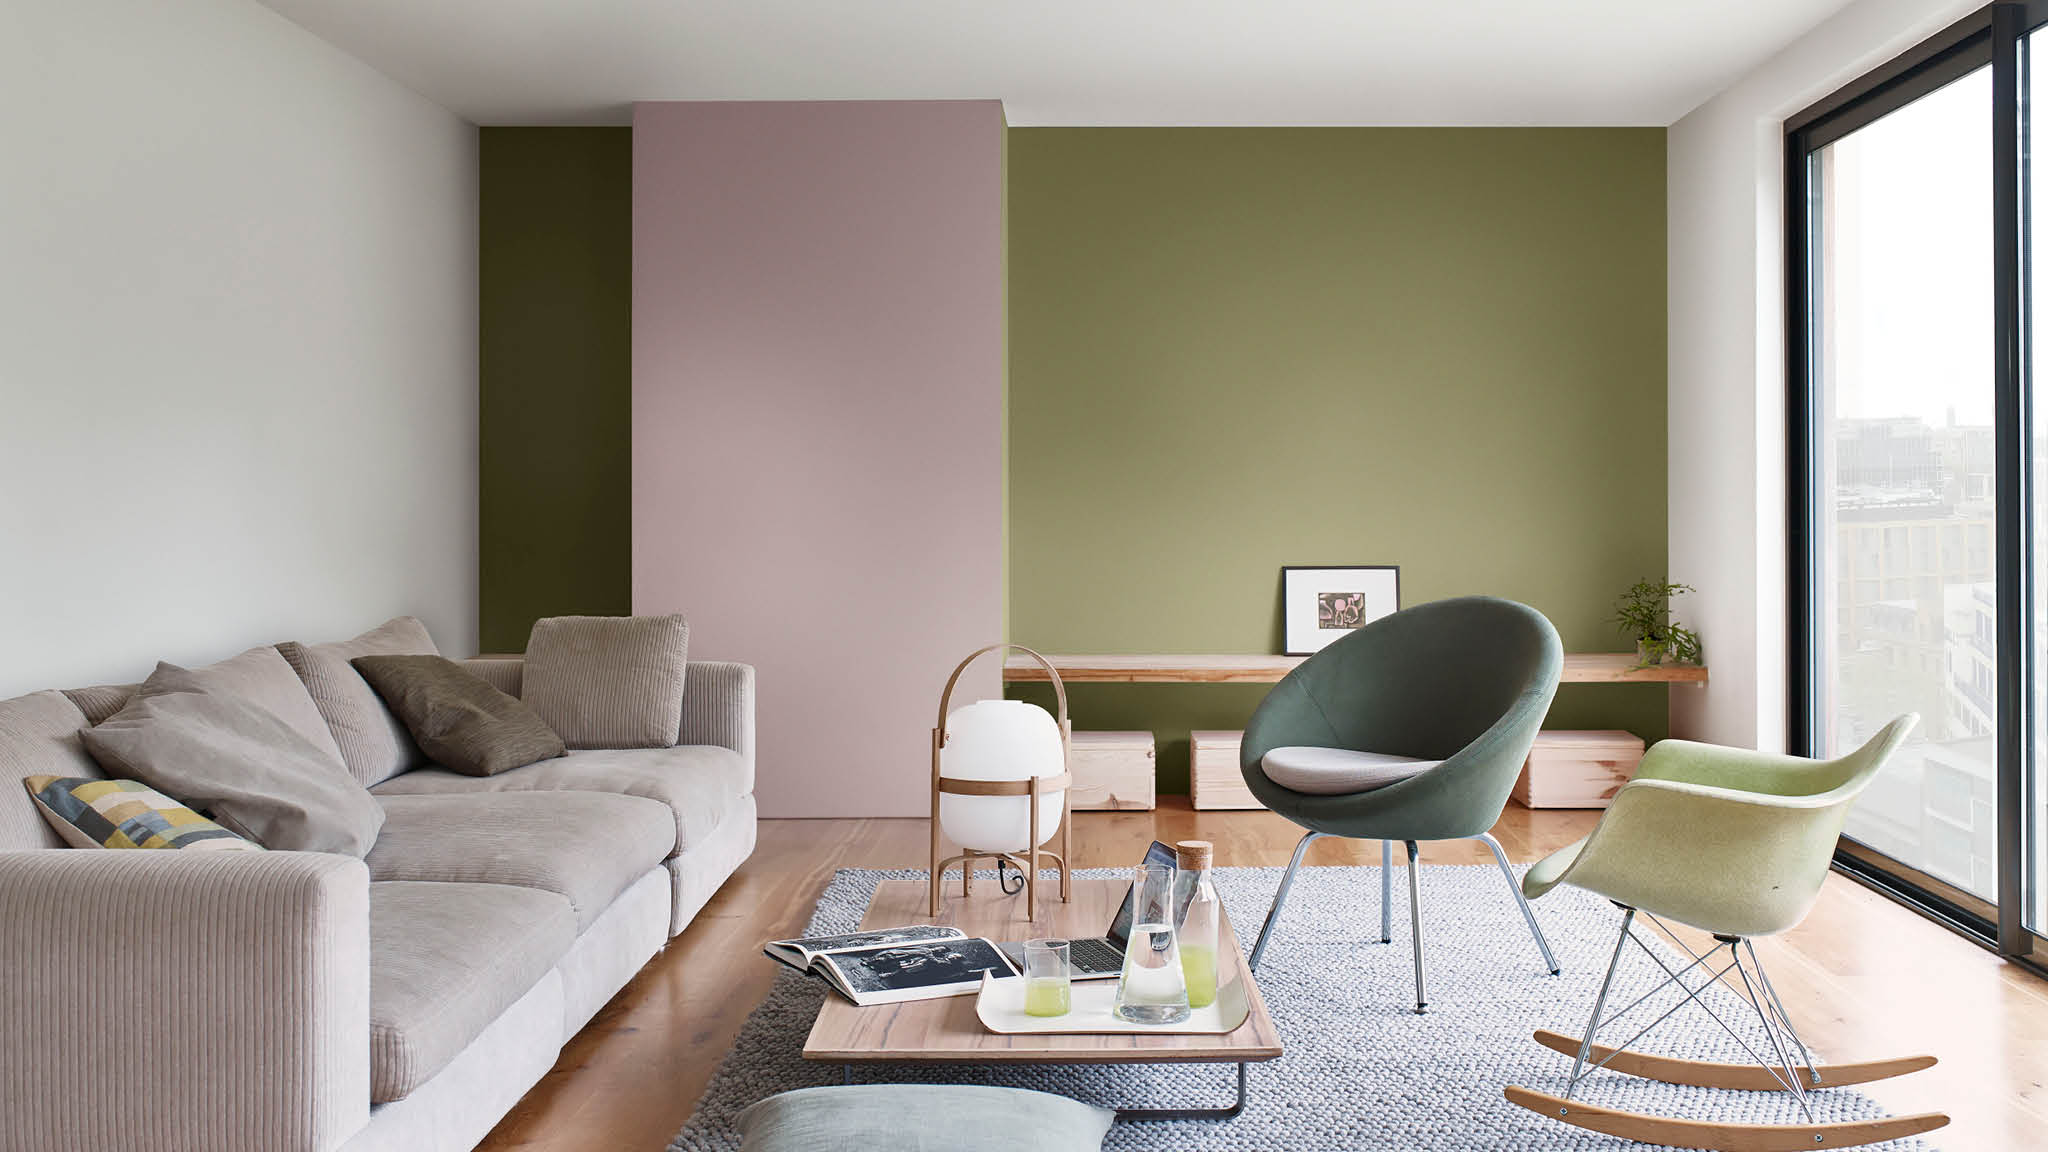 dulux-colour-of-the-year-2018-heart-wood-livingroom-inspiration-uk-article-01_0.jpg